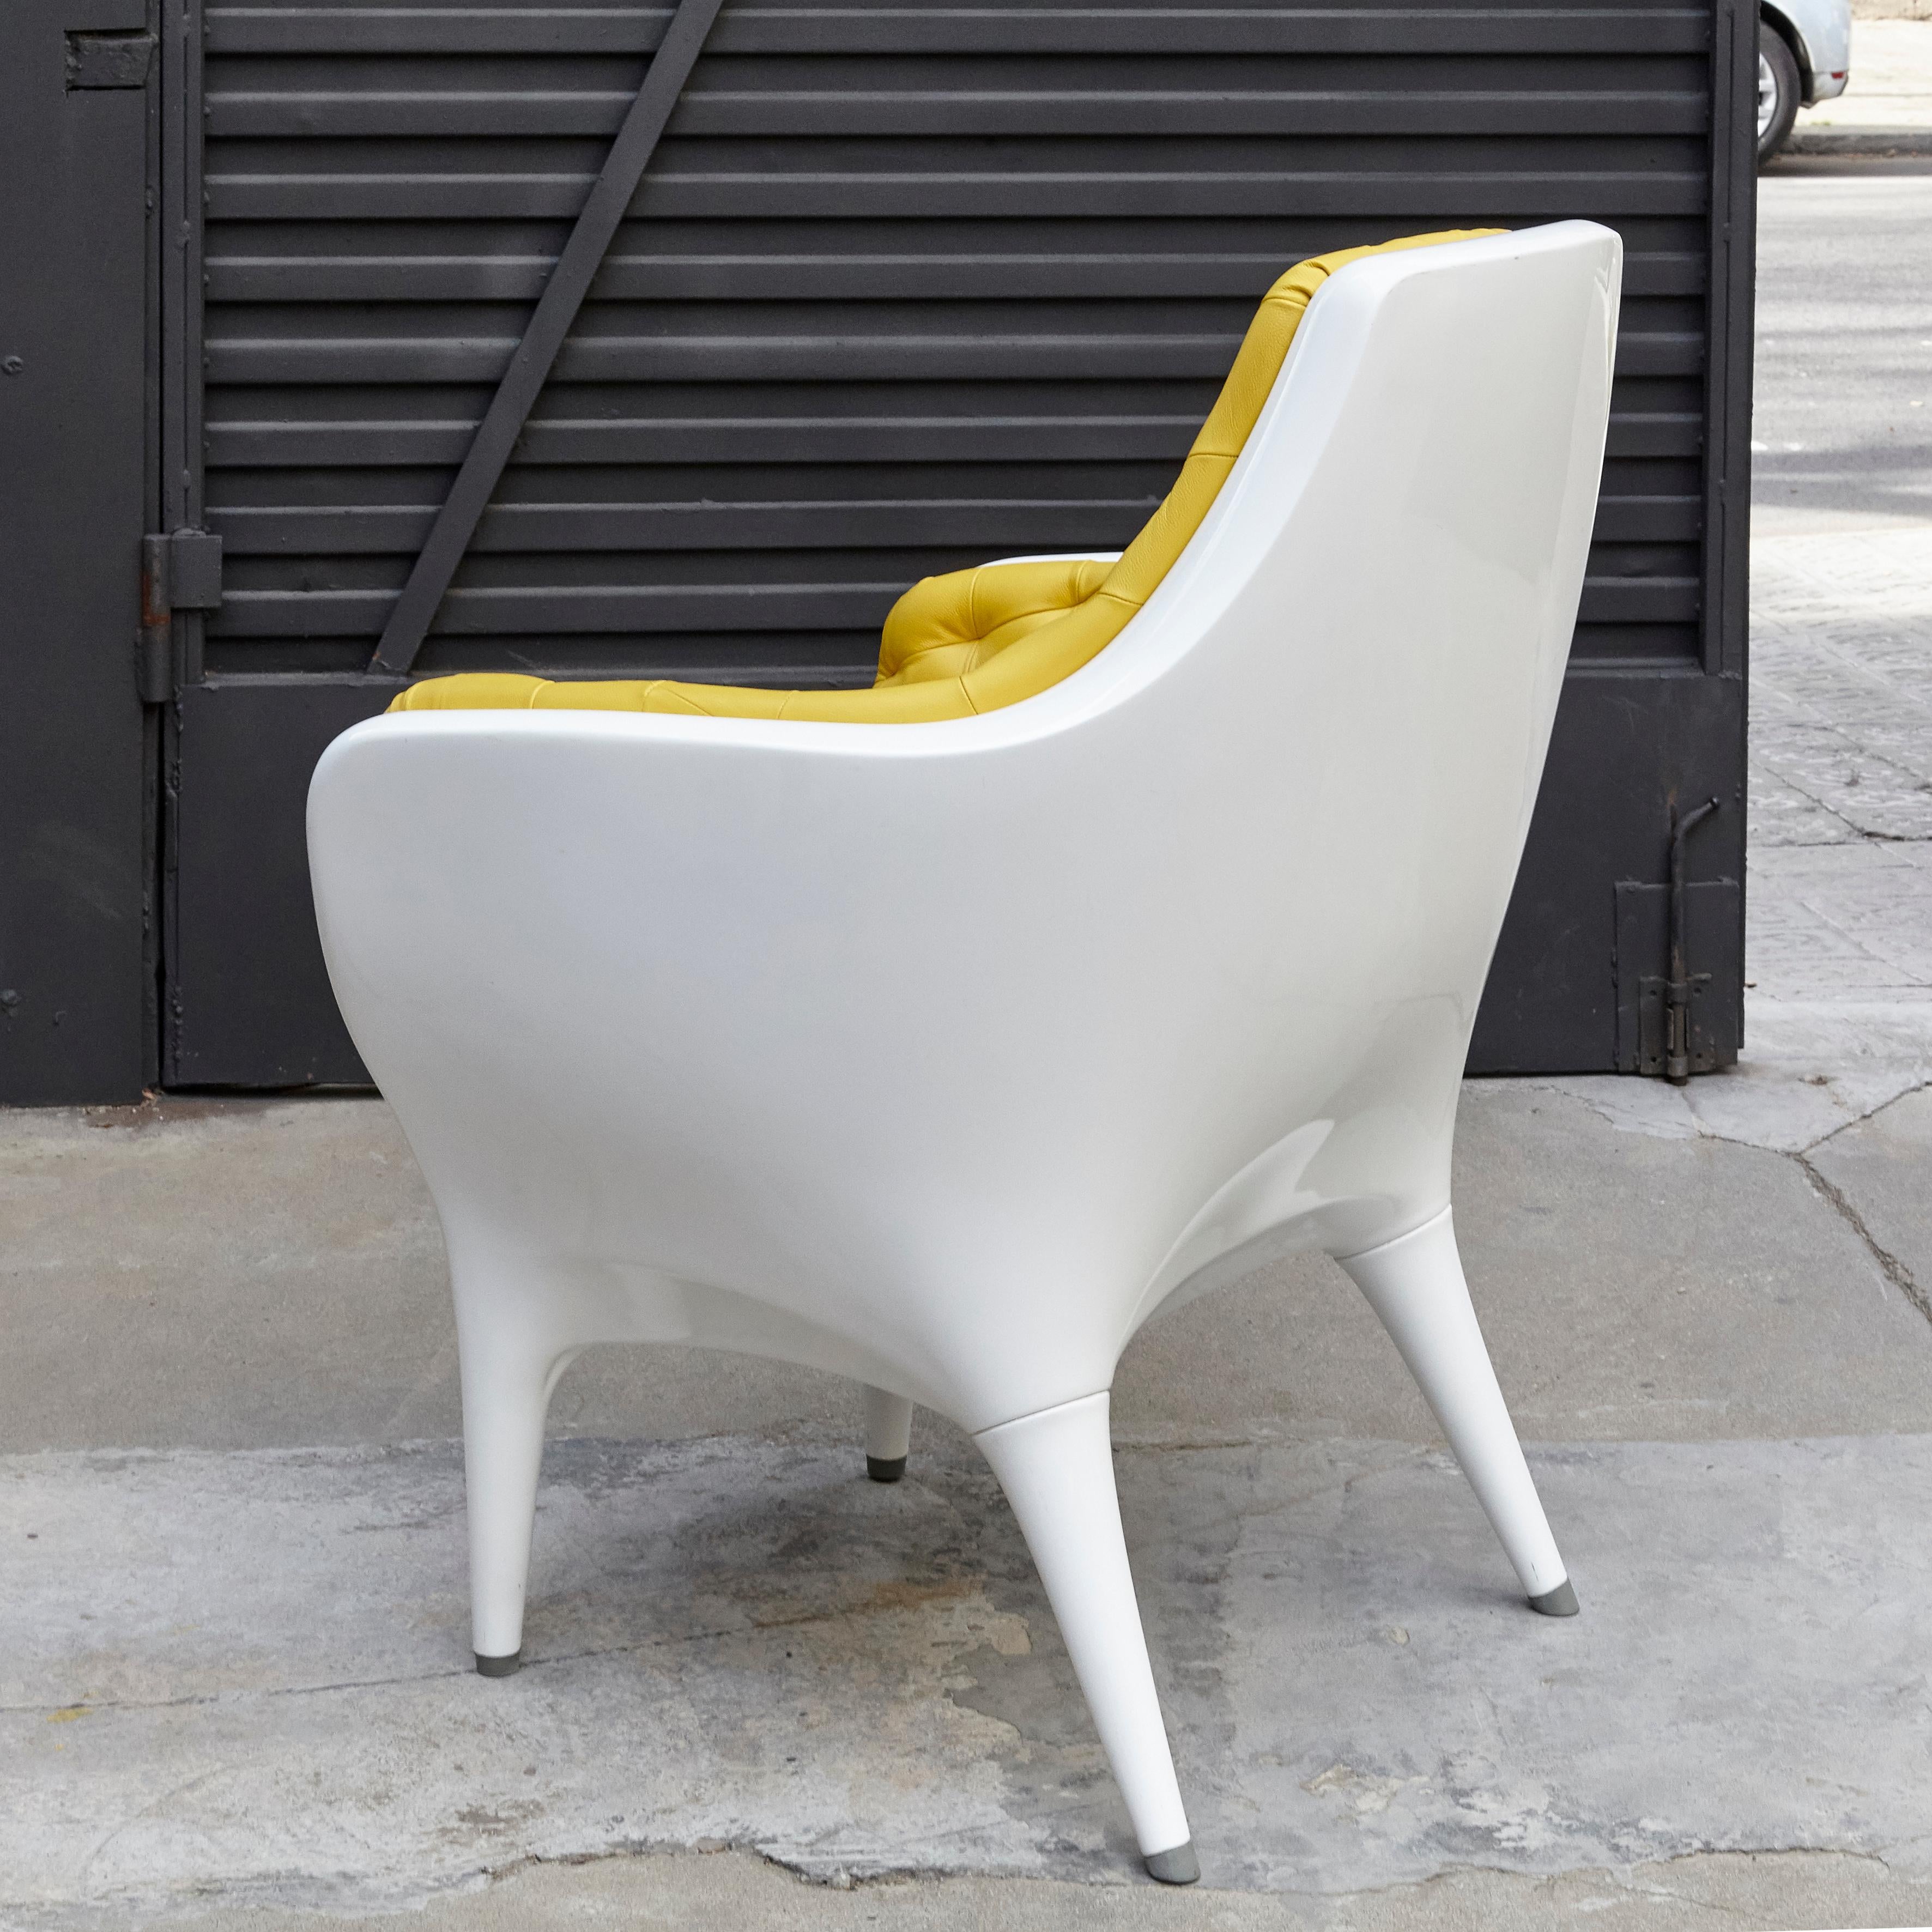 Leather Jaime Hayon Contemporary Showtime Armchair Lacquered White and Yellow For Sale